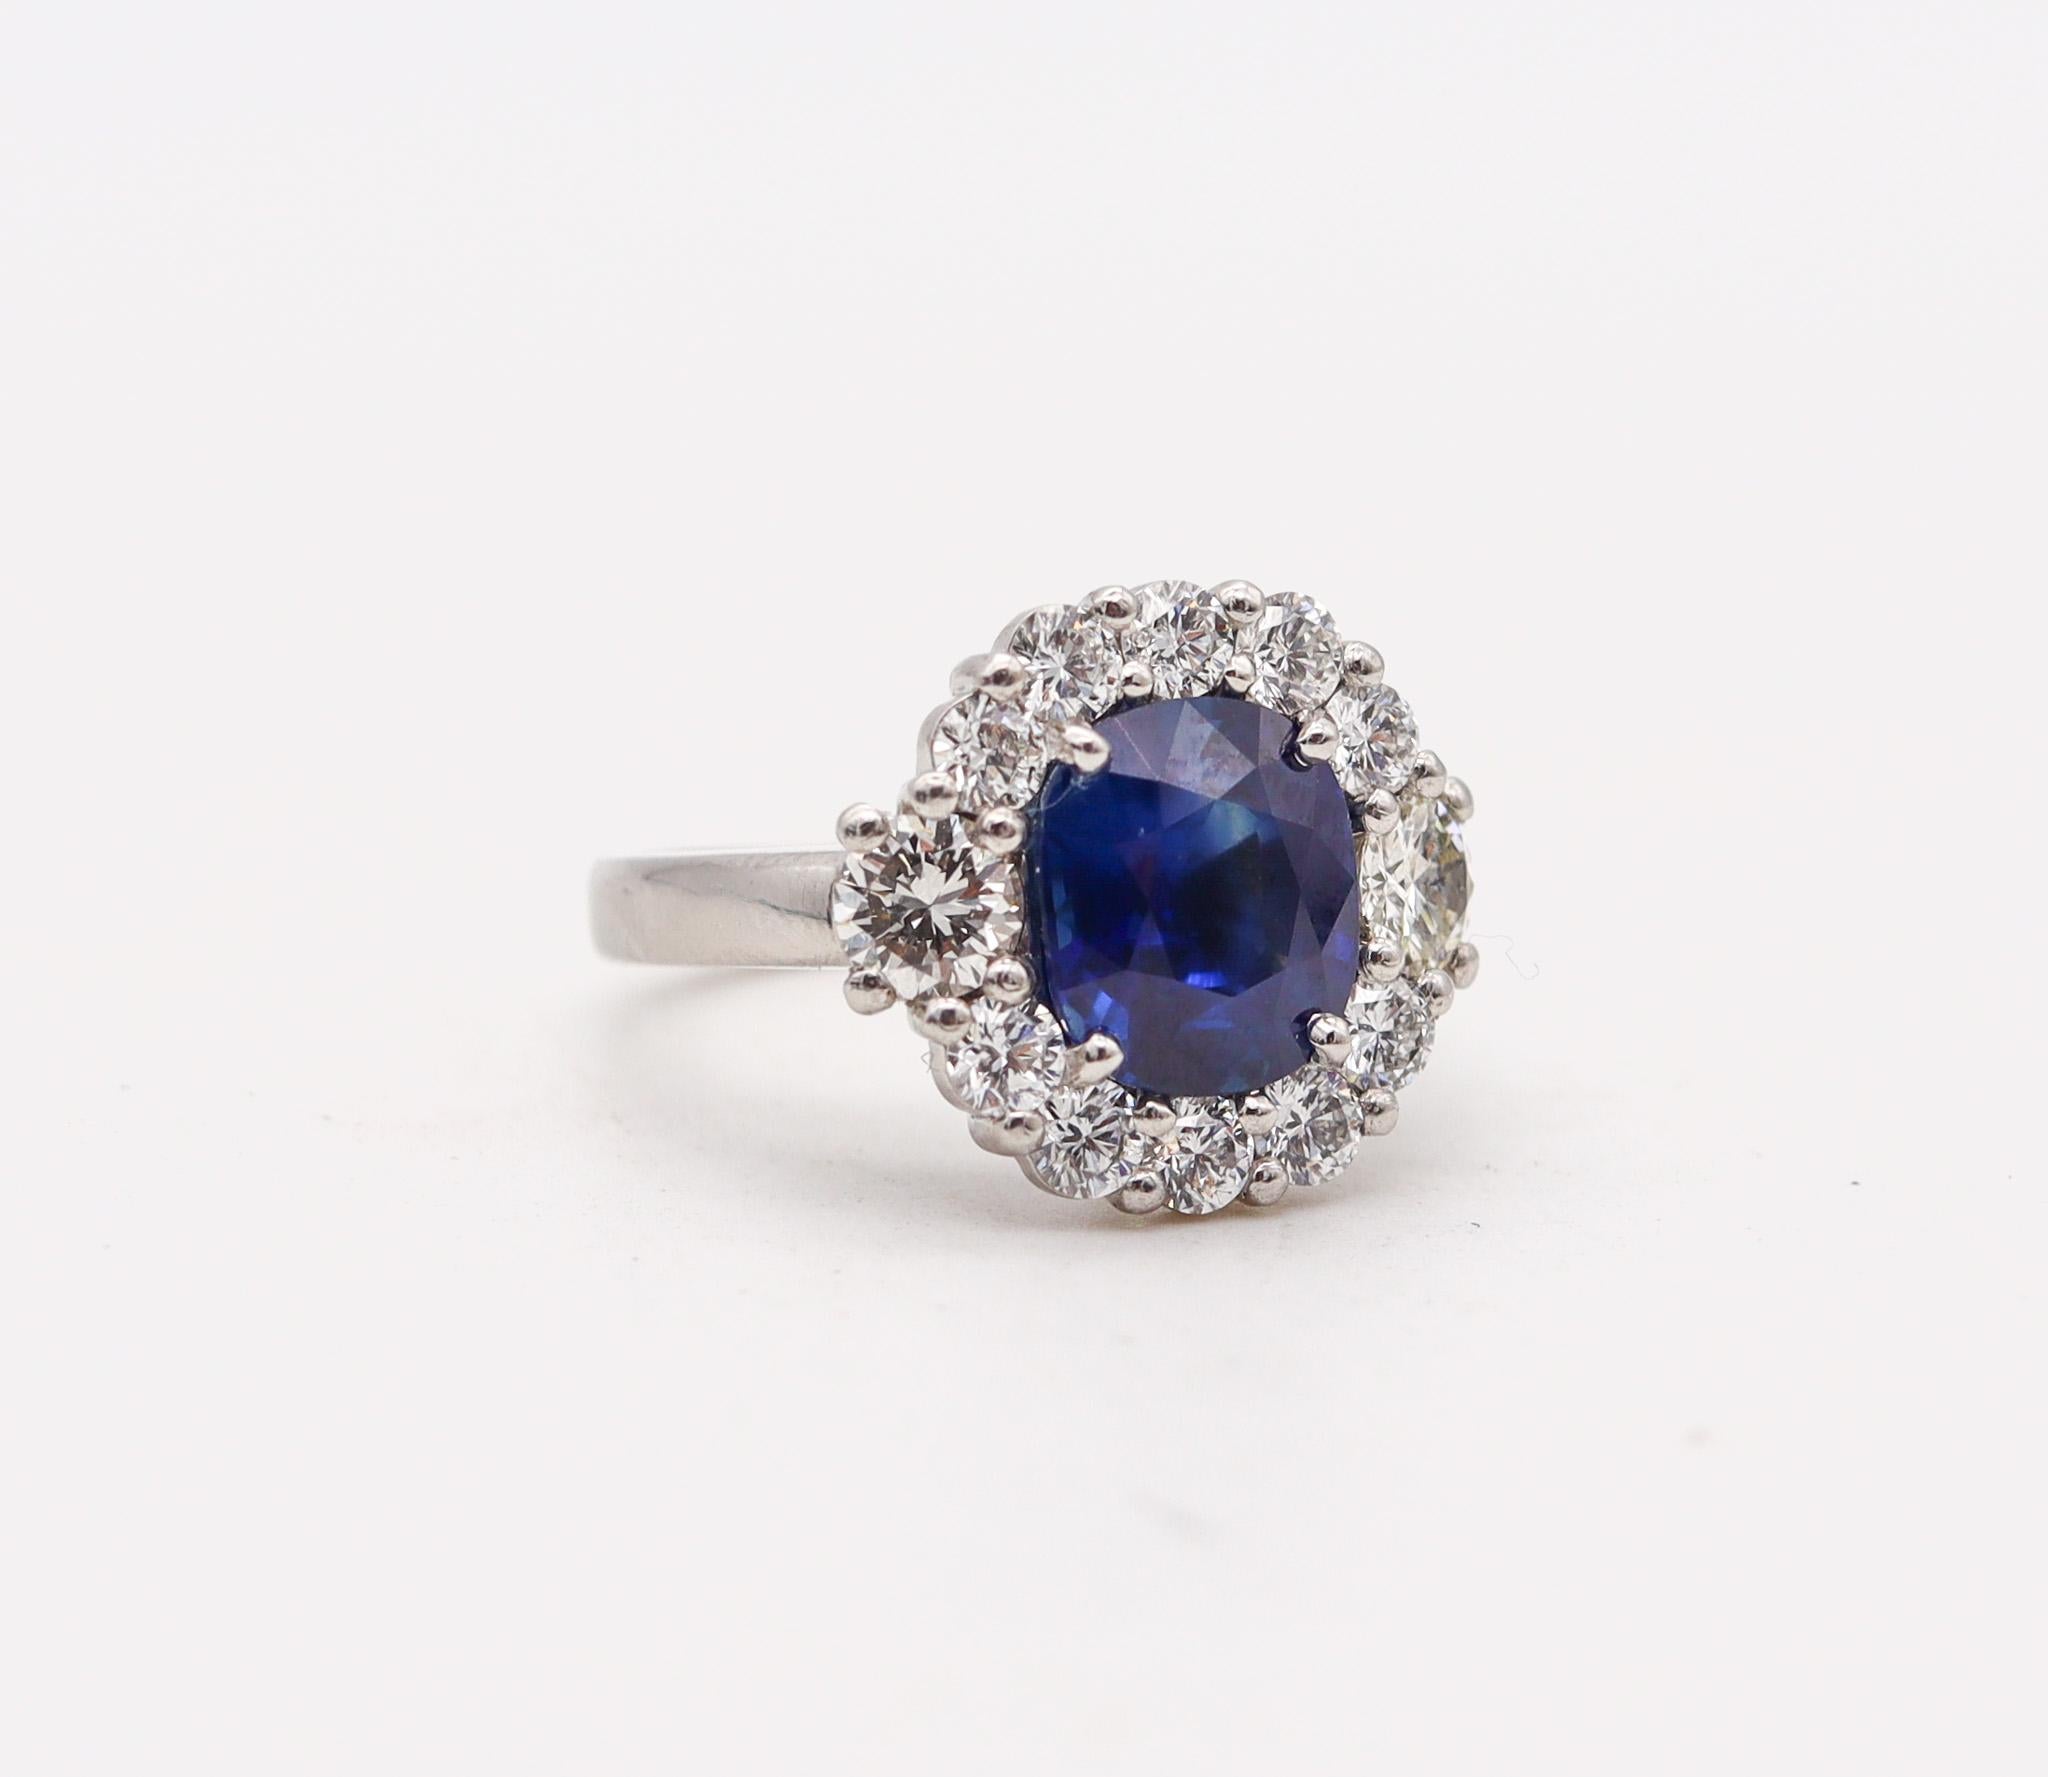 Modernist Gia Certified Cocktail Ring In Platinum With 5.79 Ctw In Sapphire And Diamonds For Sale